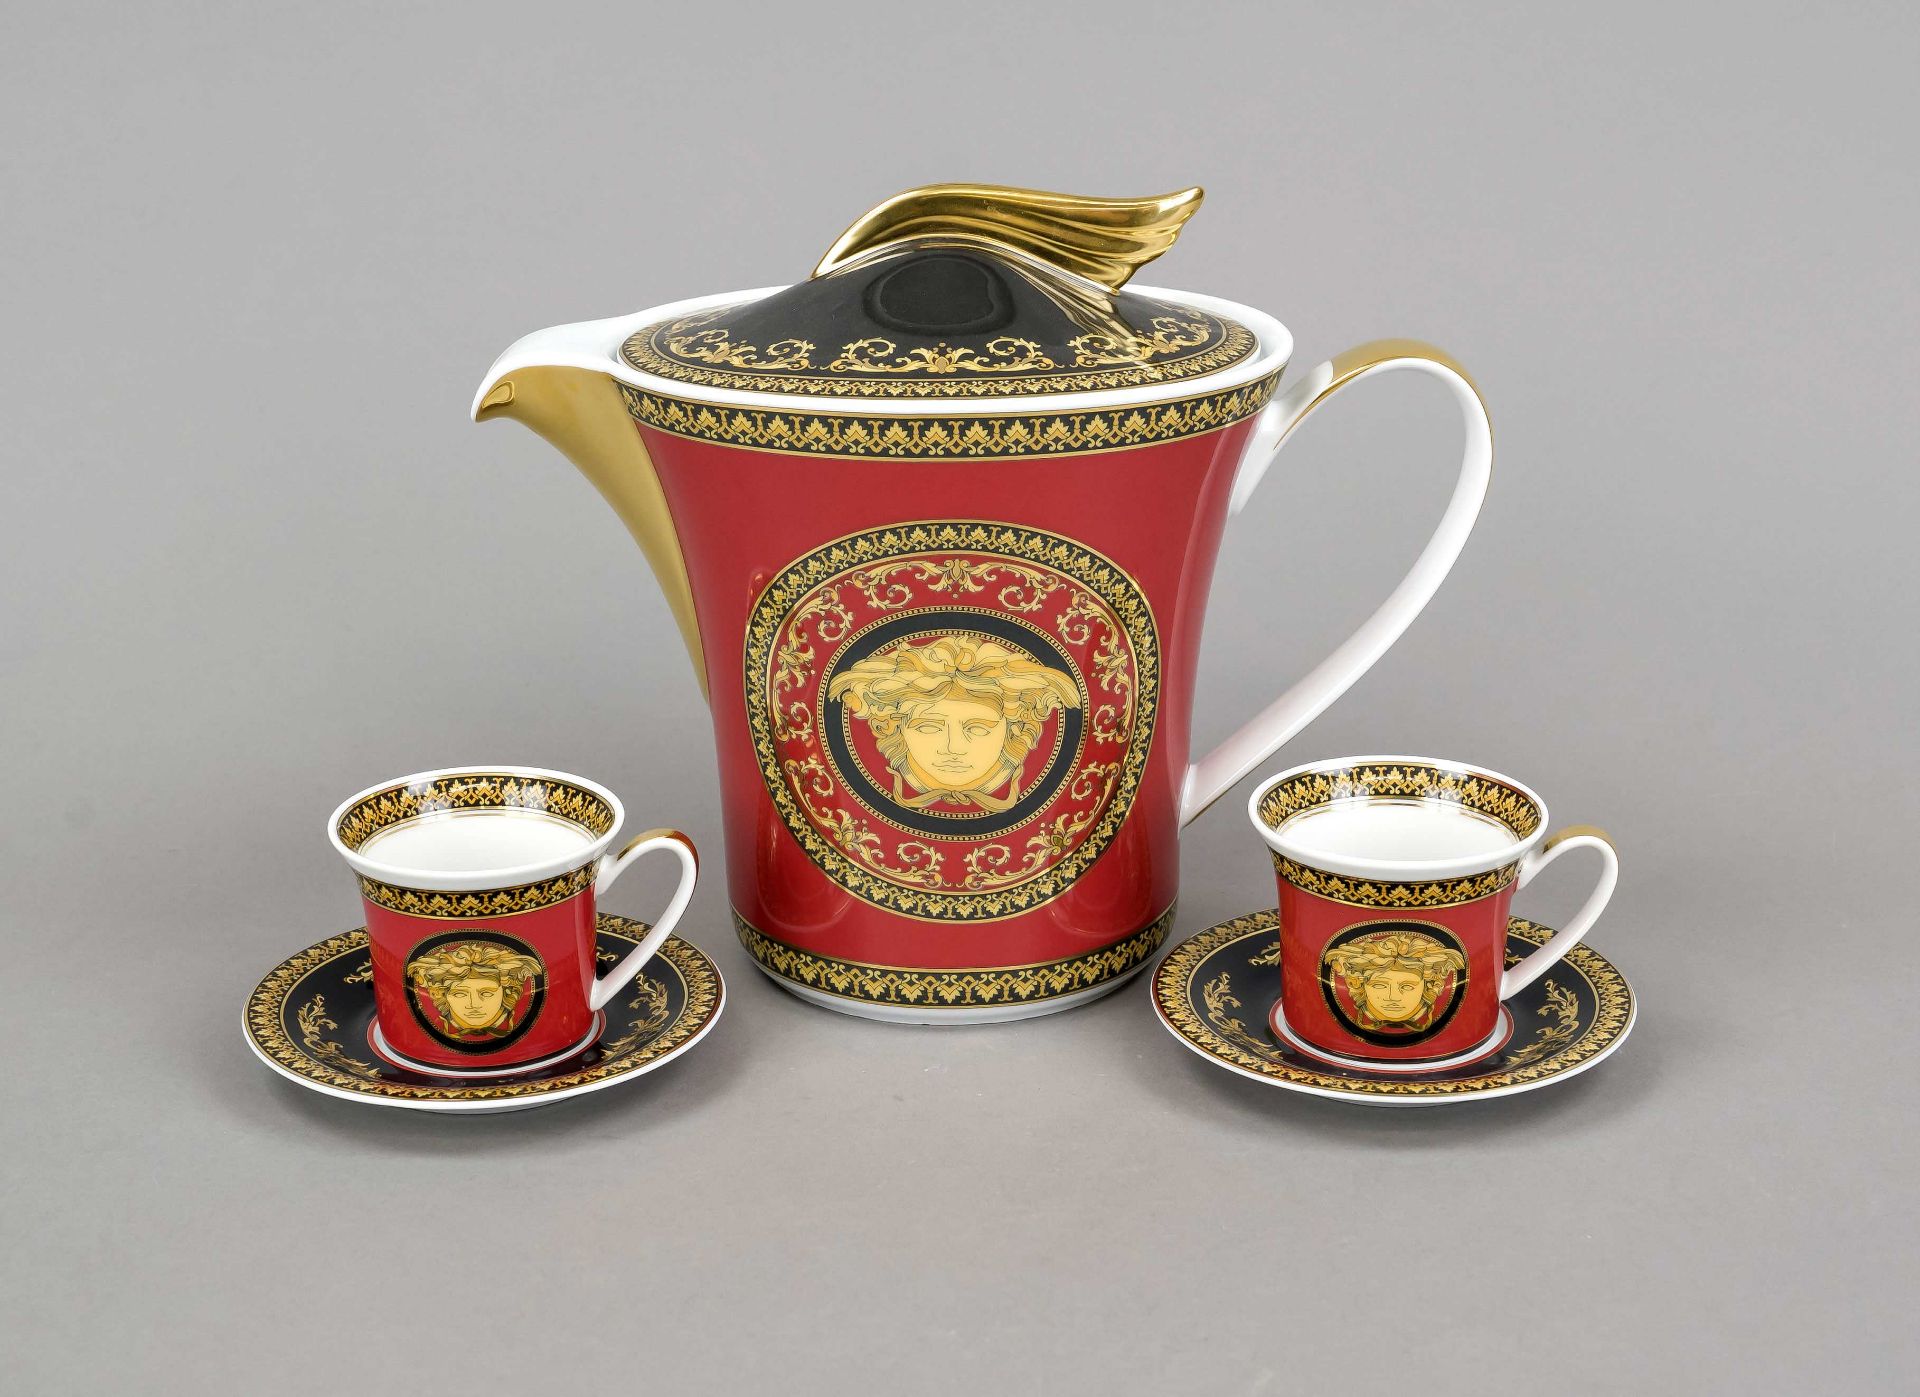 Jug and 2 cups, 5-piece, Rosenthal, designed by Versace for Rosenthal, late 20th century, polychrome